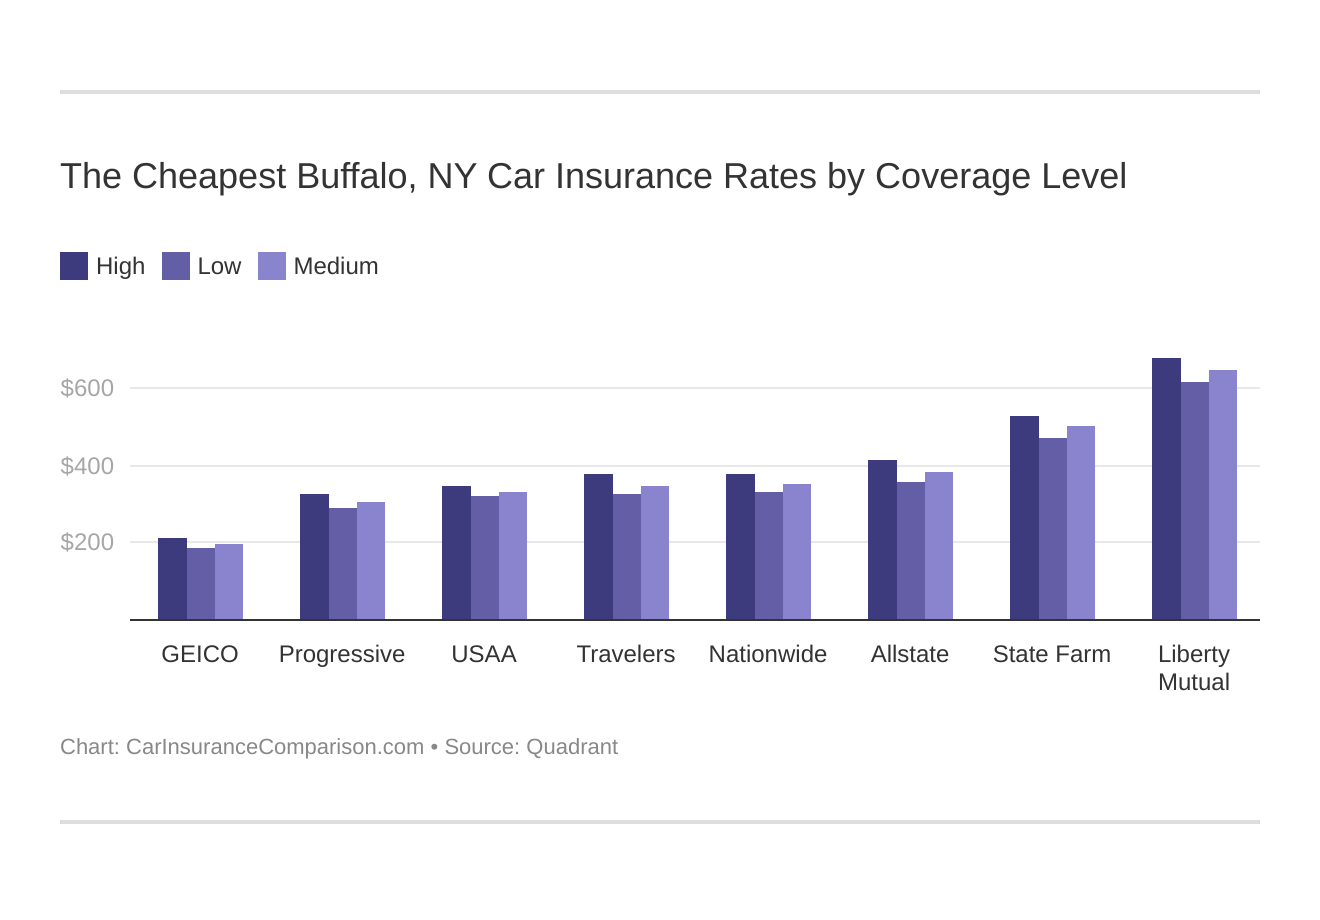 The Cheapest Buffalo, NY Car Insurance Rates by Coverage Level